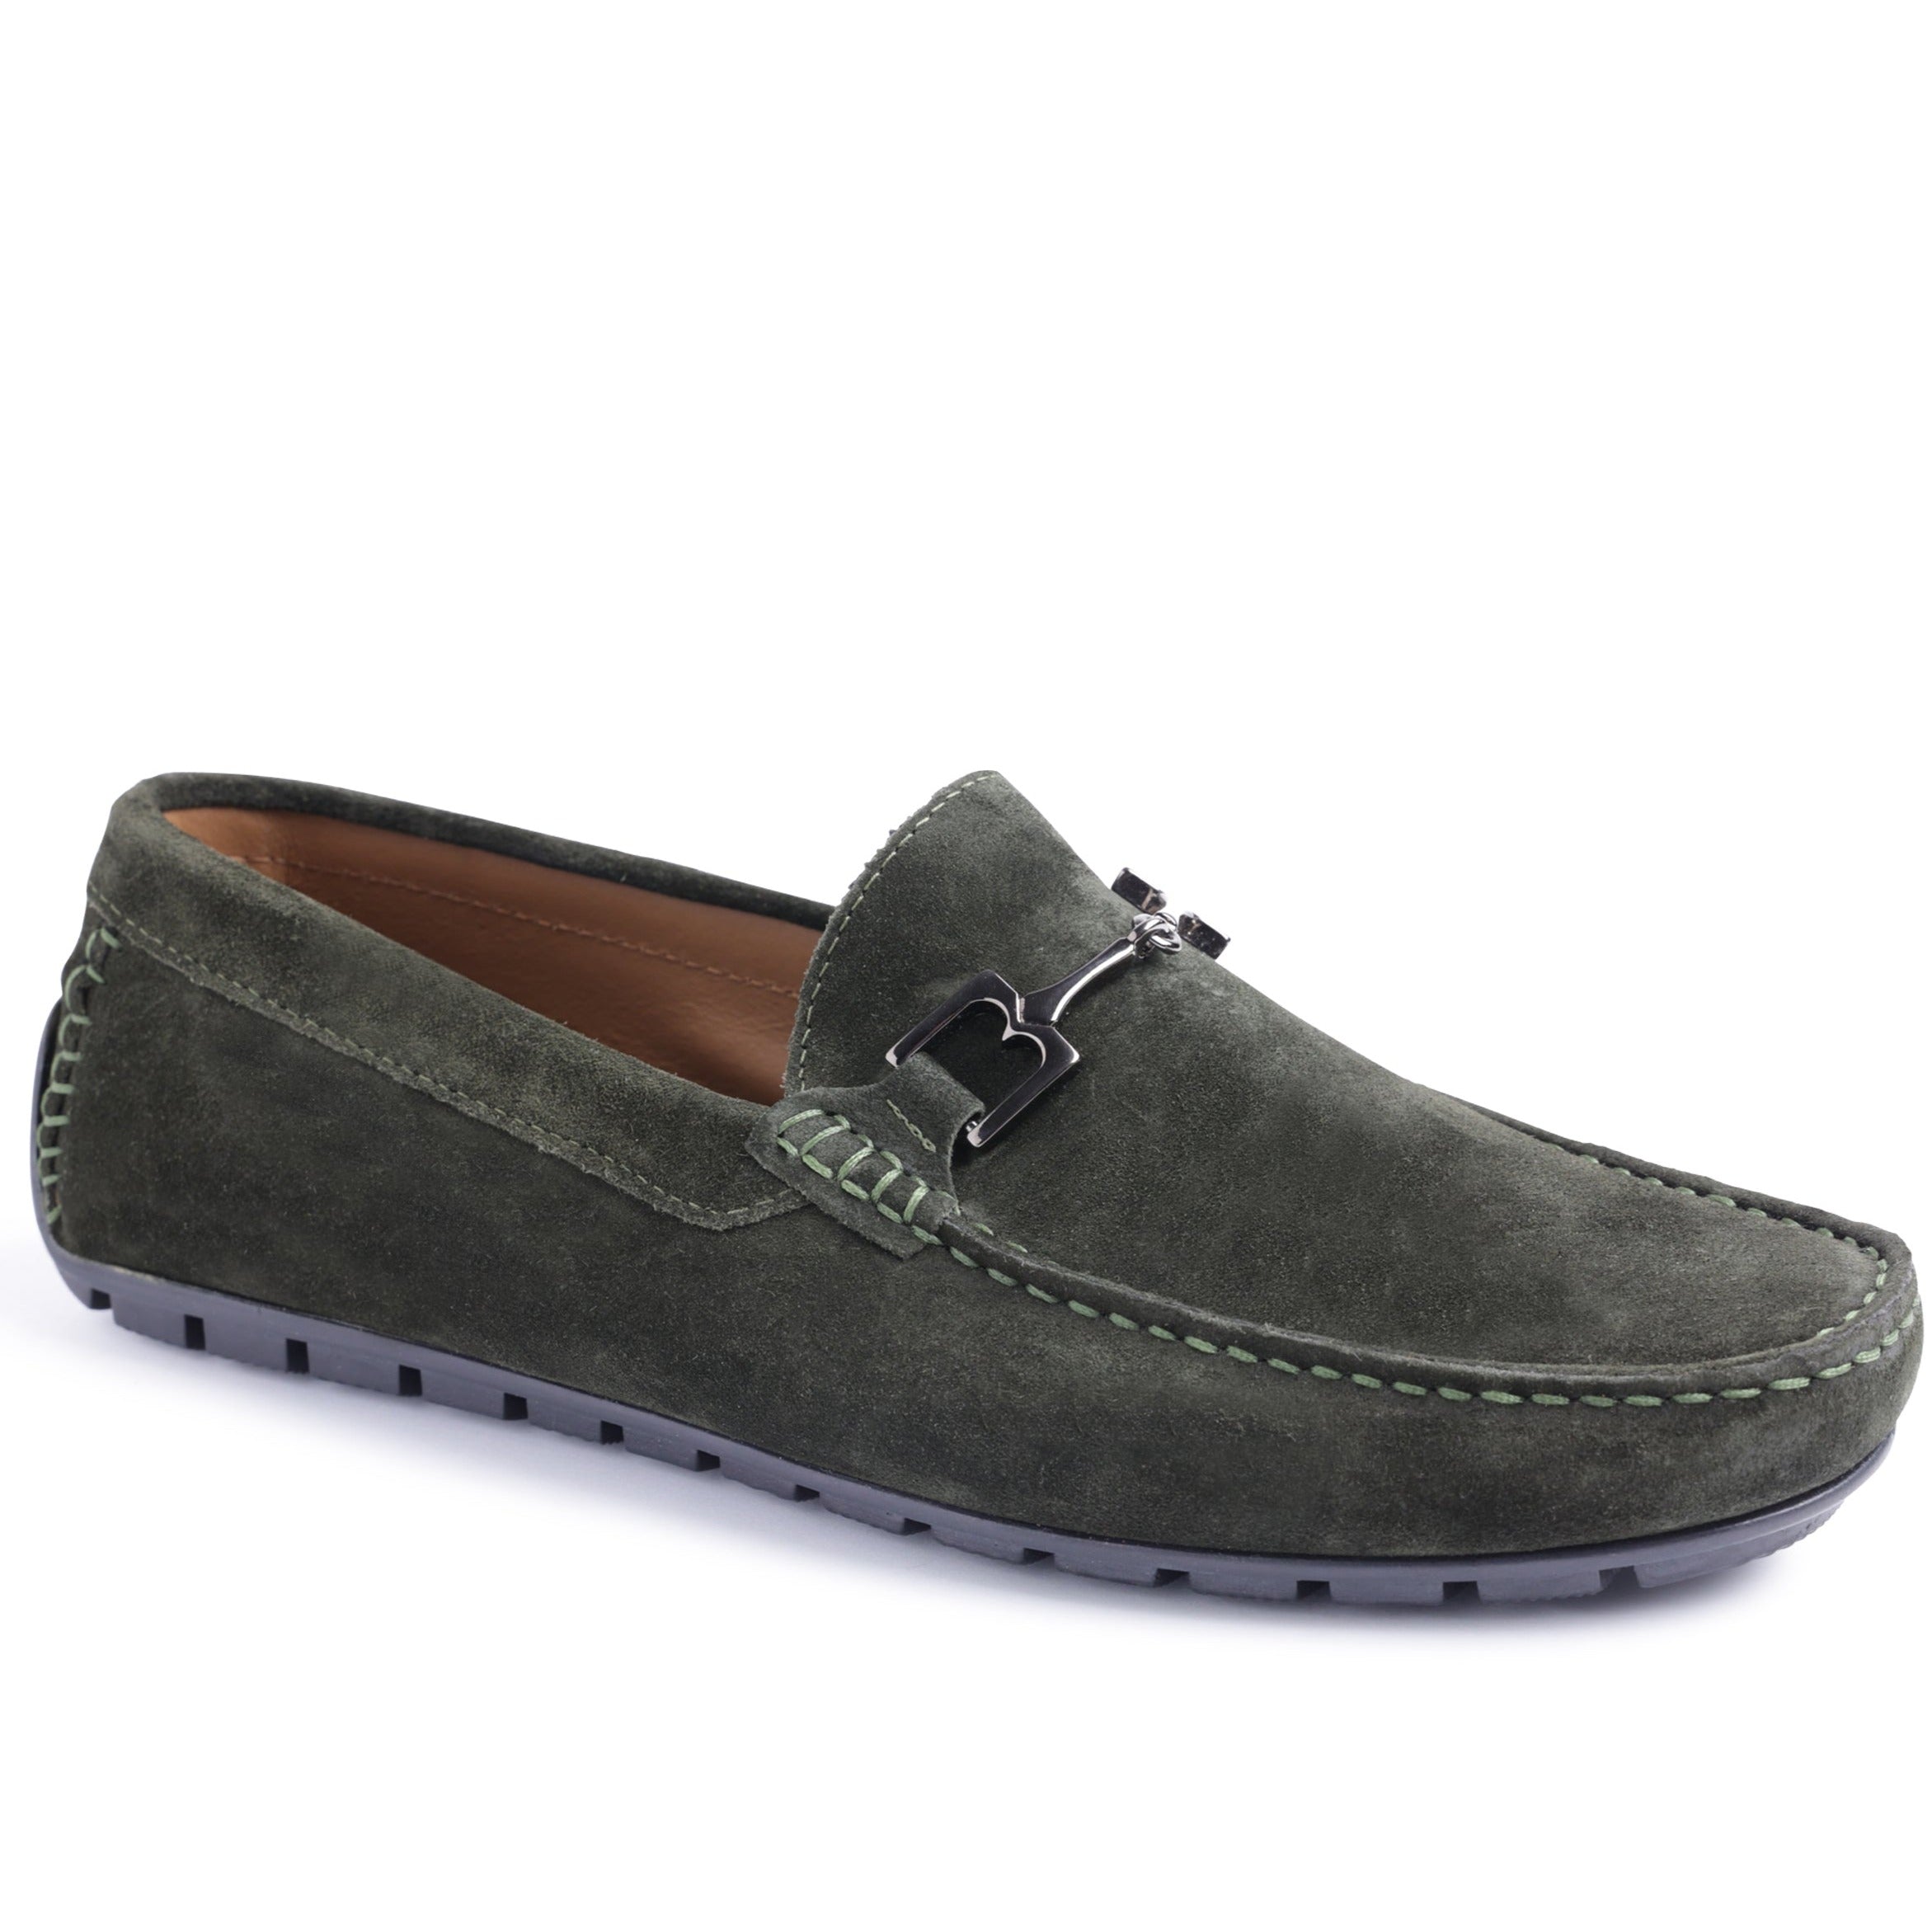 Image of Xander Casual Driving Moccasin - Military Green Suede